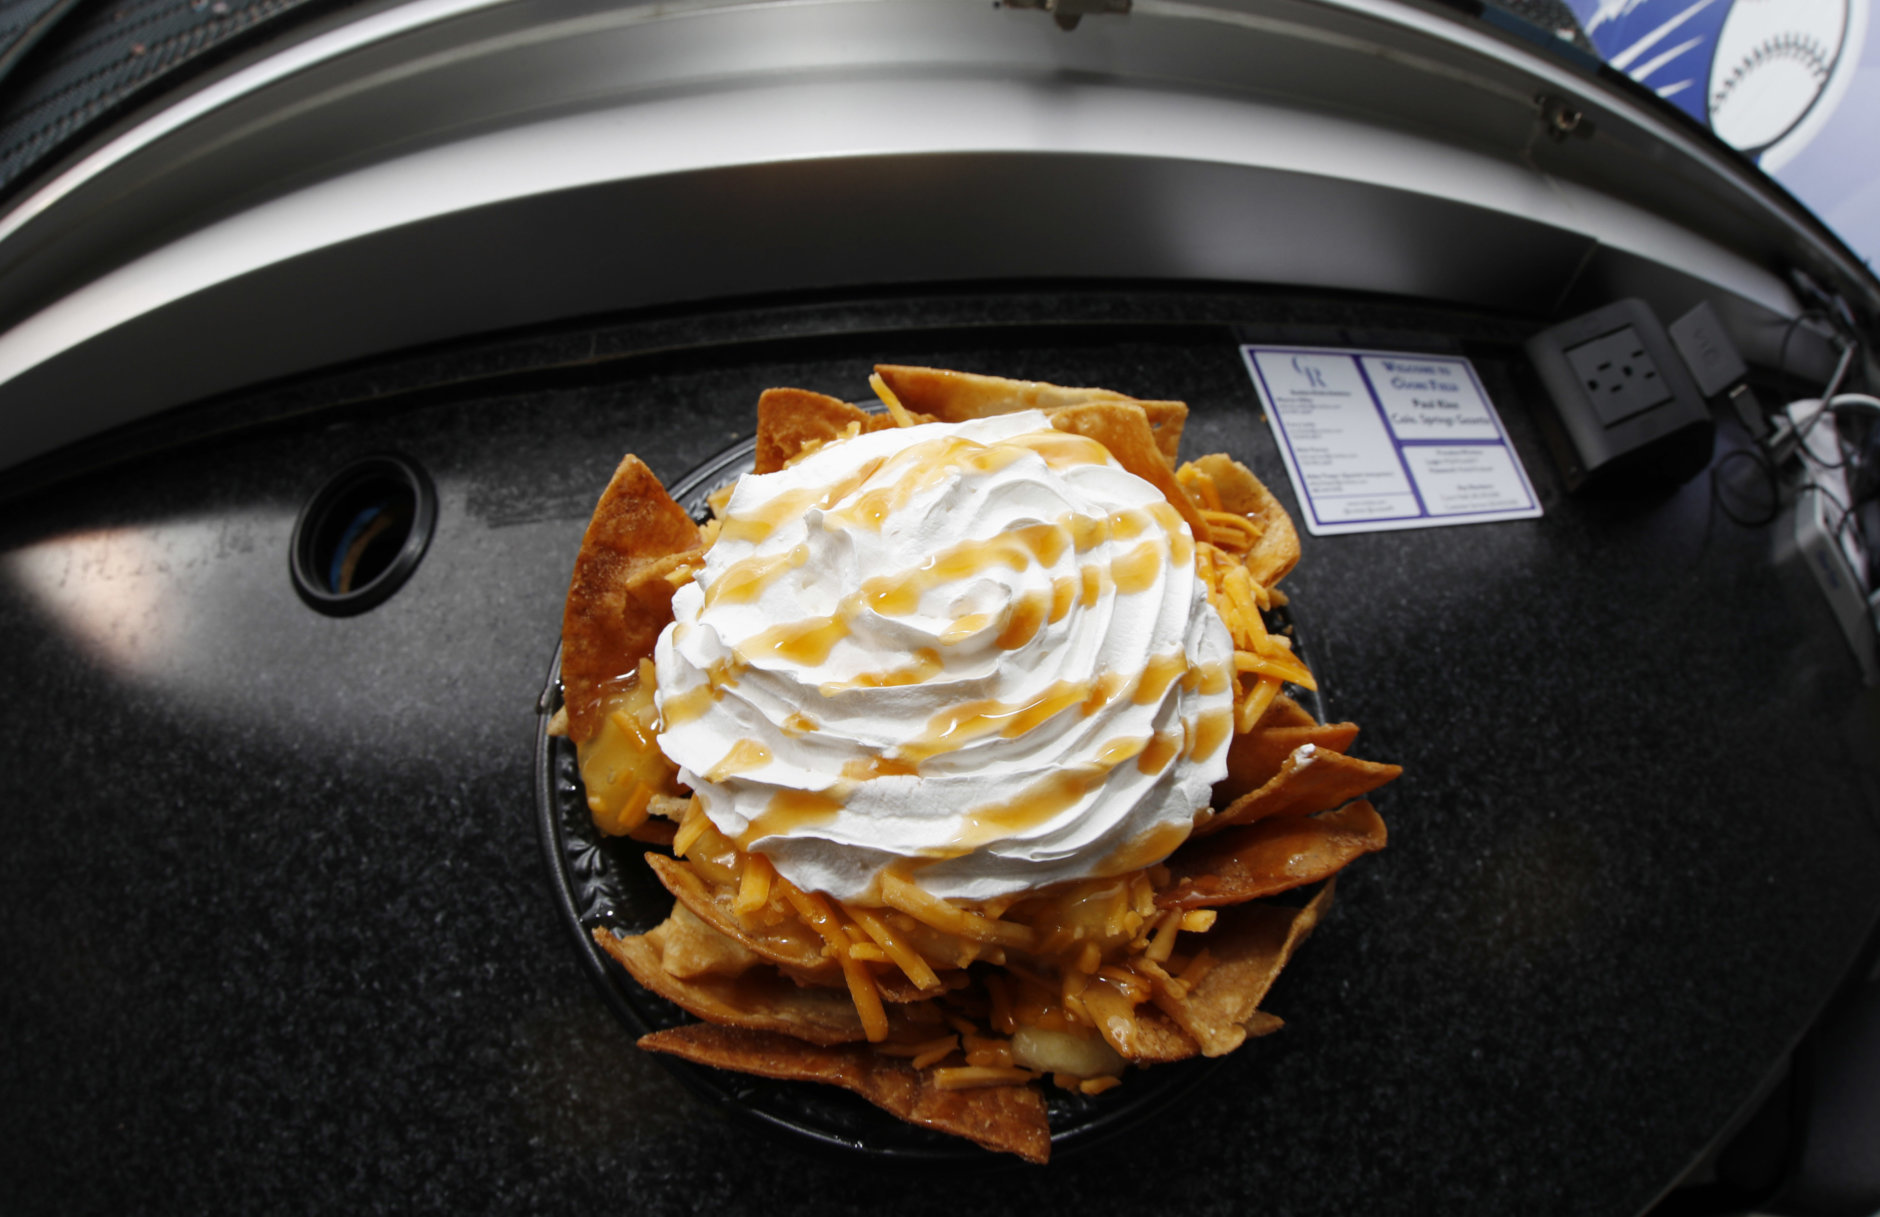 In this Saturday, May 6, 2017, a bowl of apple pie nachos is shown at Coors Field in Denver. The $6-bowl consists of cinnamon-covered nacho chips, apple pie filling, cheddar cheese, topped with whipped cream and then drizzled with caramel sauce. The concoction is rated at 740 calories. (AP Photo/David Zalubowski)